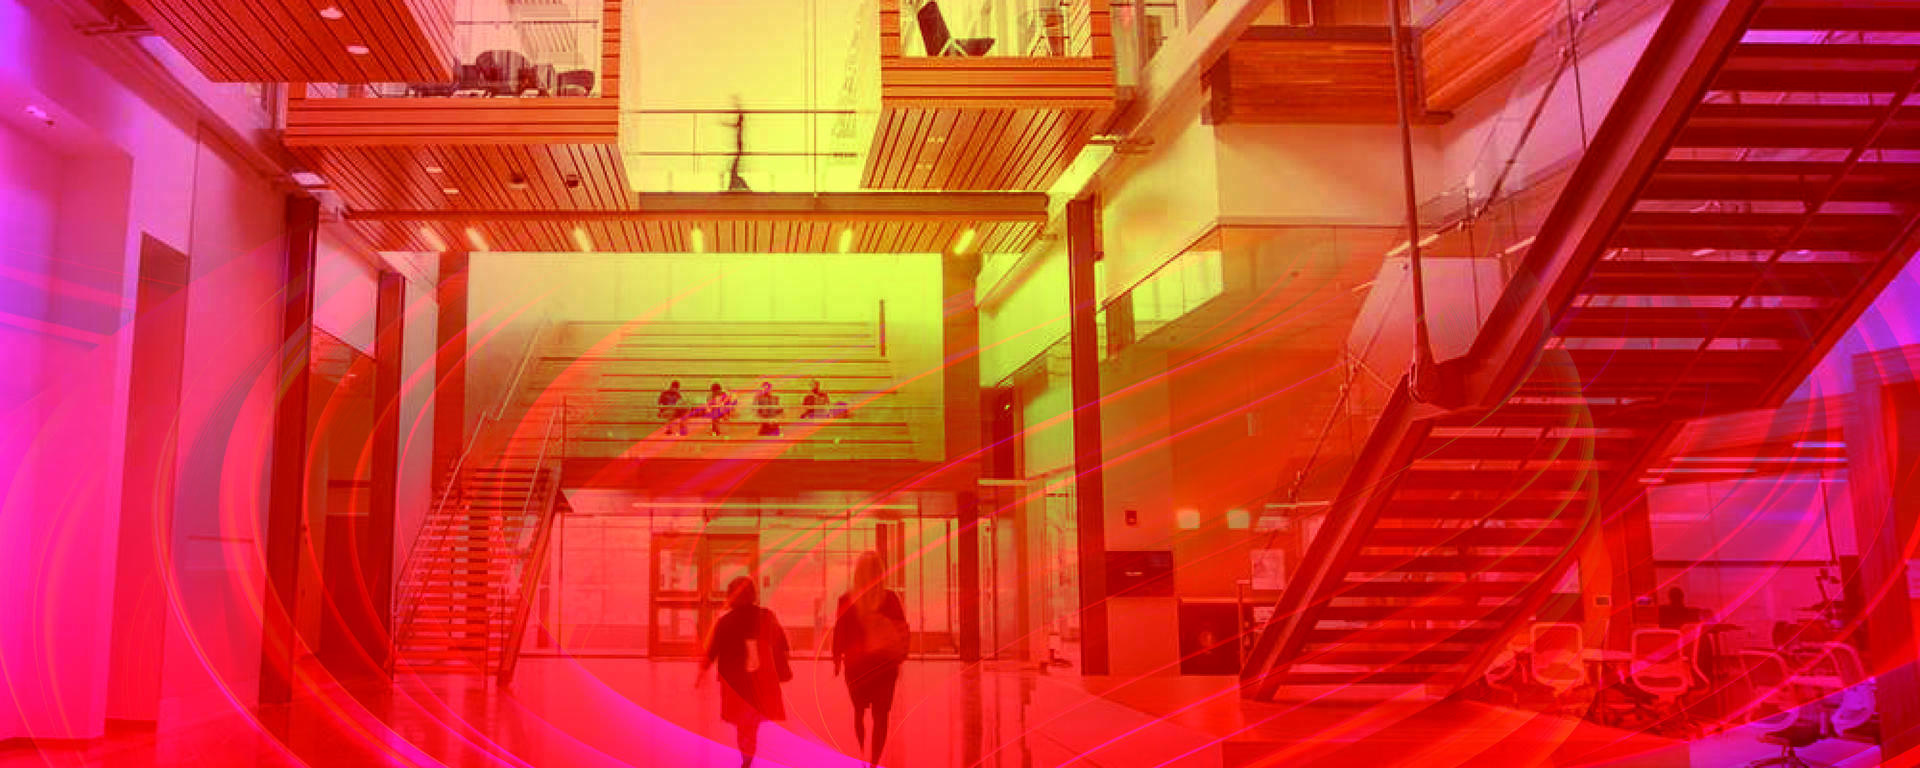 Interior of the Taylor Institute building, showing two people walking through, with a red and yellow gradient overlay.